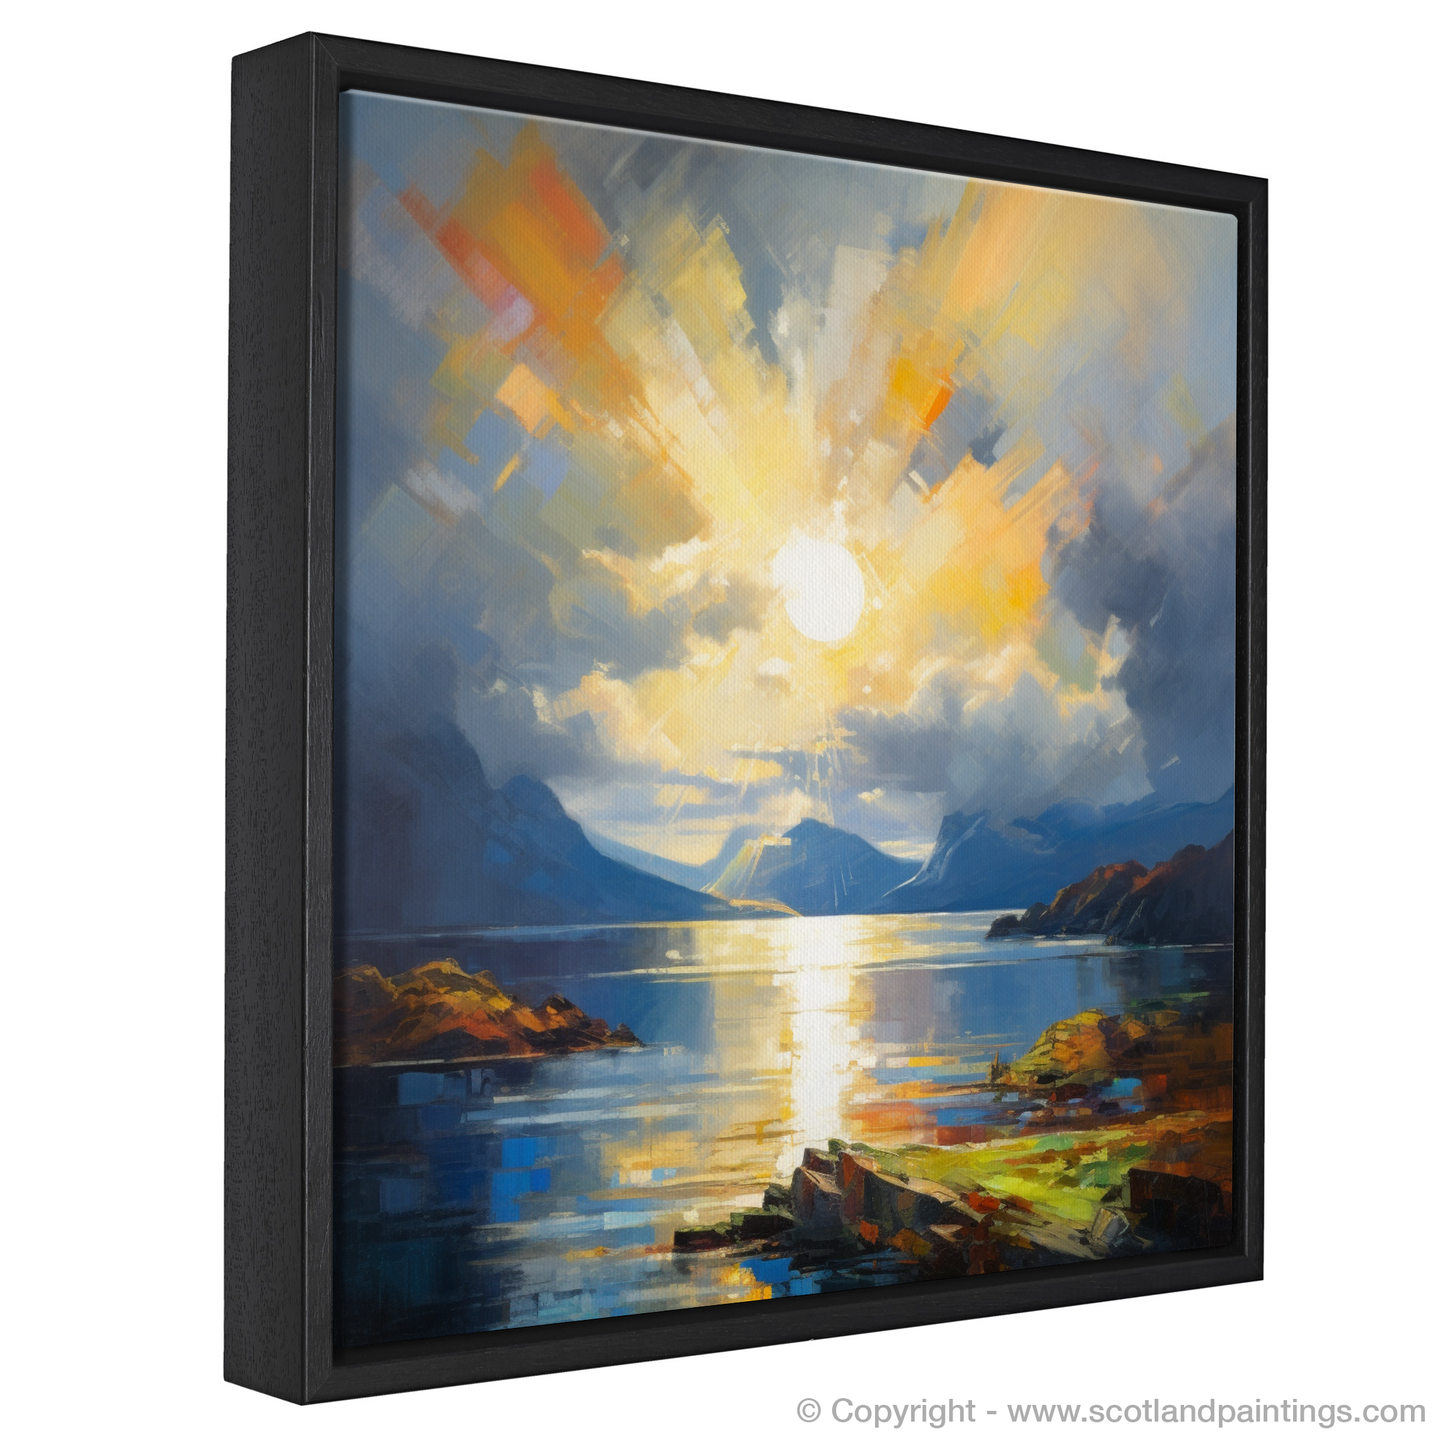 Painting and Art Print of Sun rays through clouds above Loch Lomond entitled "Sunlight Serenade over Loch Lomond".